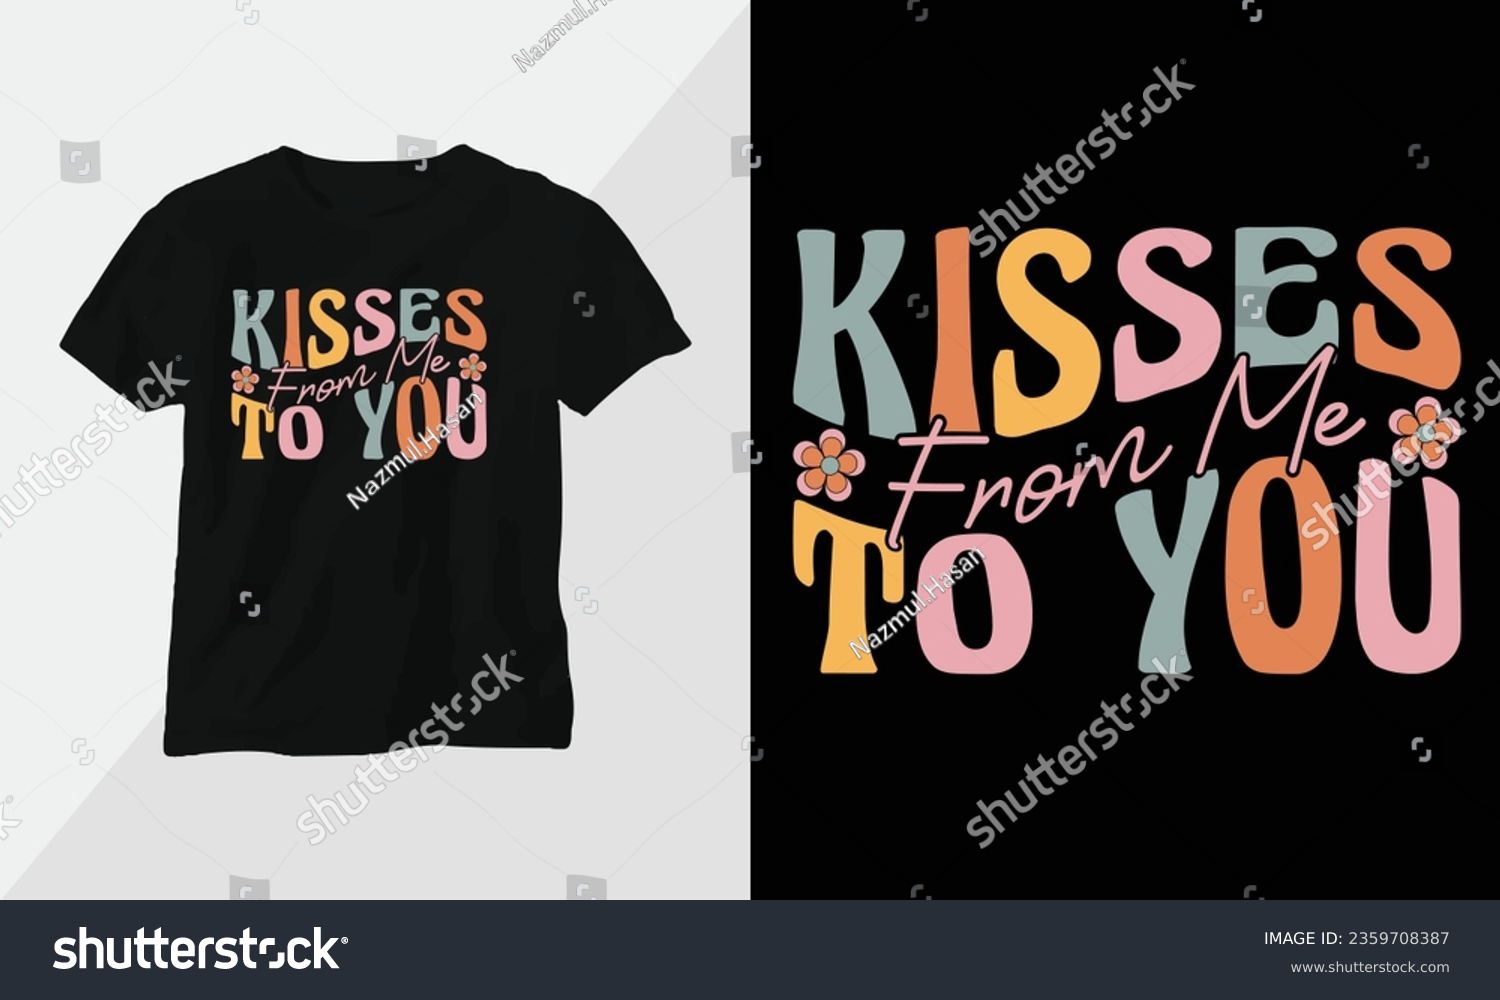 SVG of Kisses from me to you - Retro Groovy Inspirational T-shirt Design with retro style svg